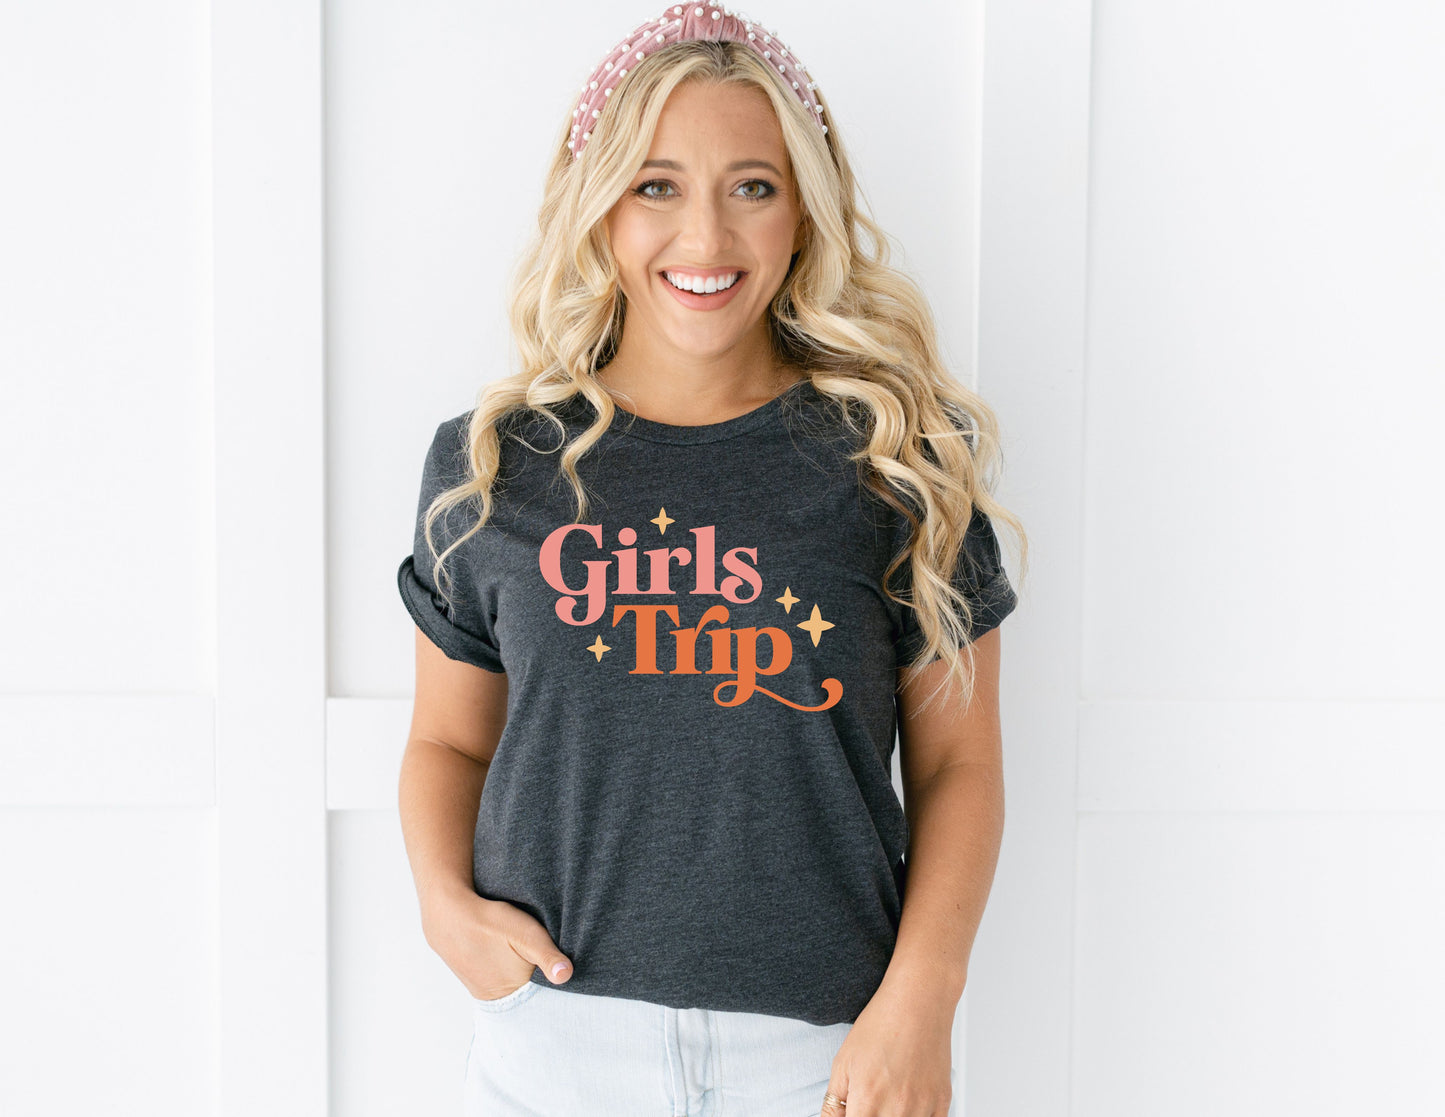 Summer Girls Trip Shirt - soft and cozy material